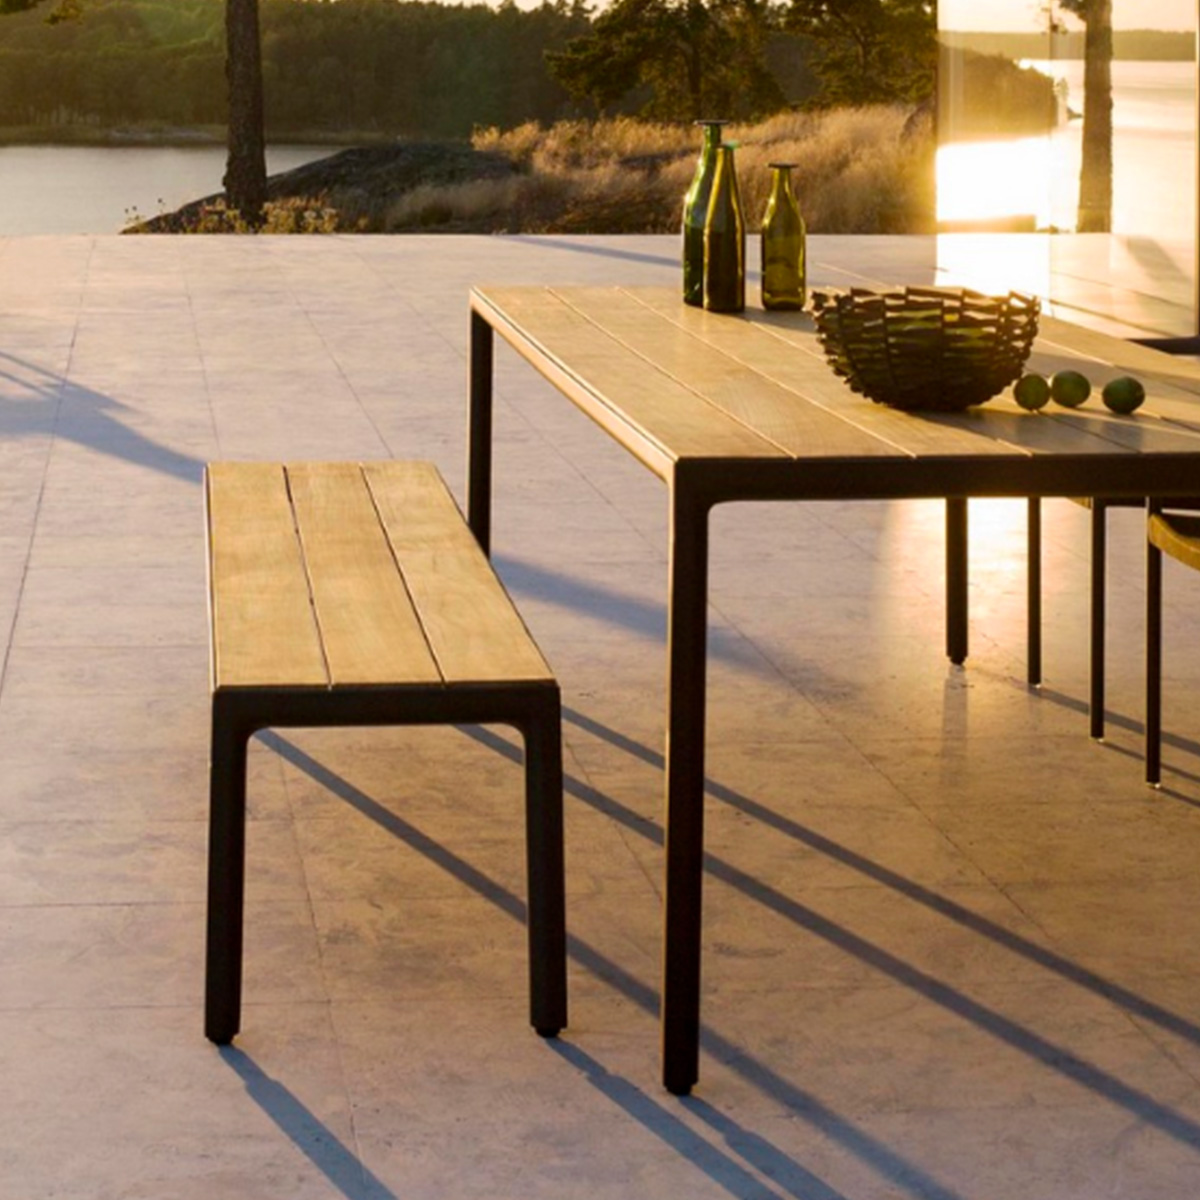 Benches | Illum bench | Tribu | Xtra Contract | Xtra Professional | Outdoor Bench